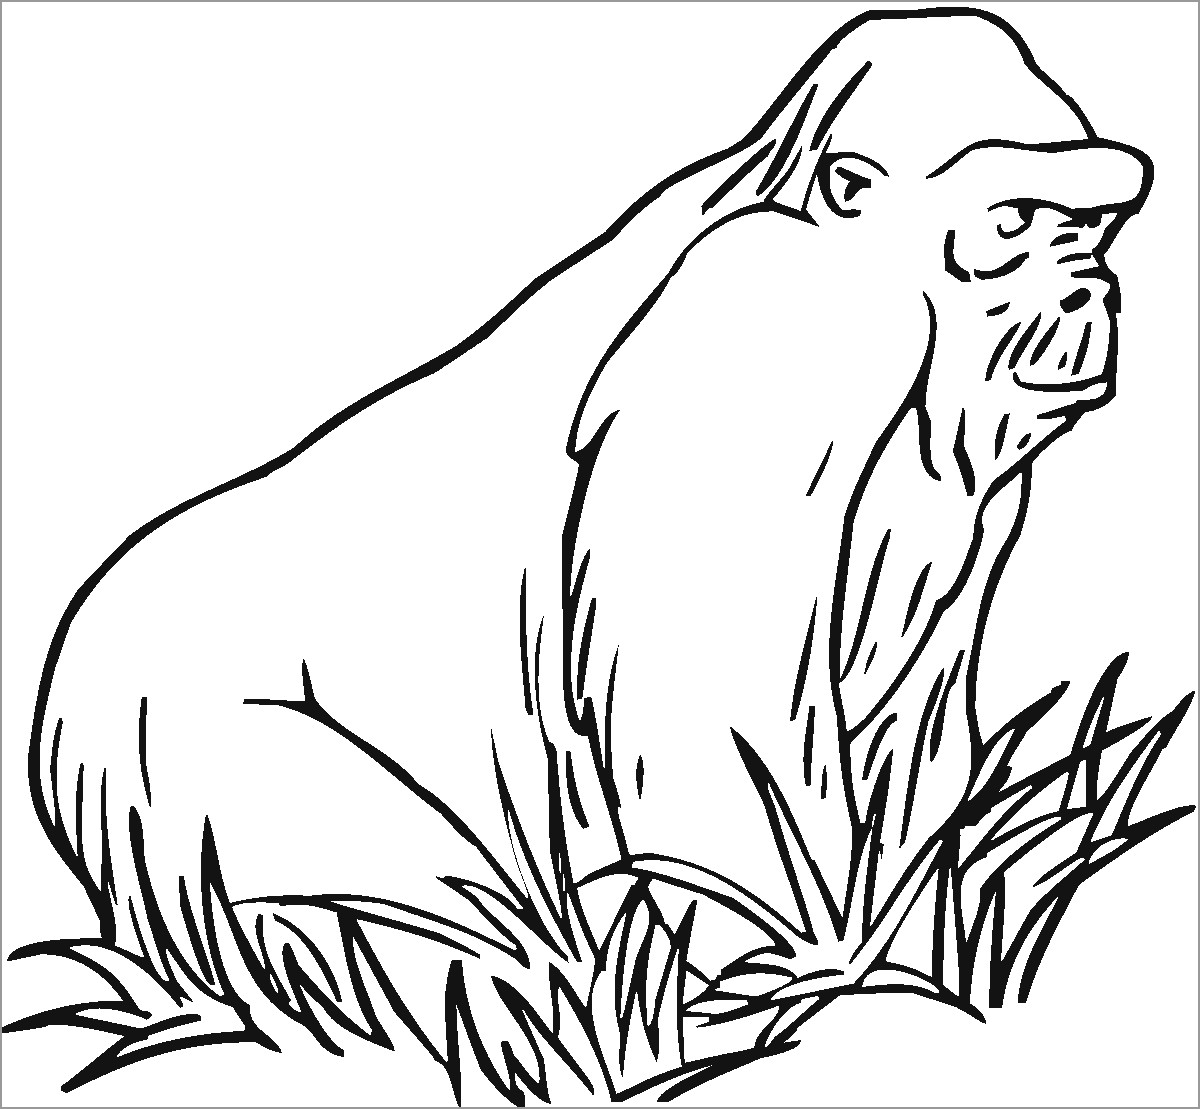 Apes On the Grass Coloring Page